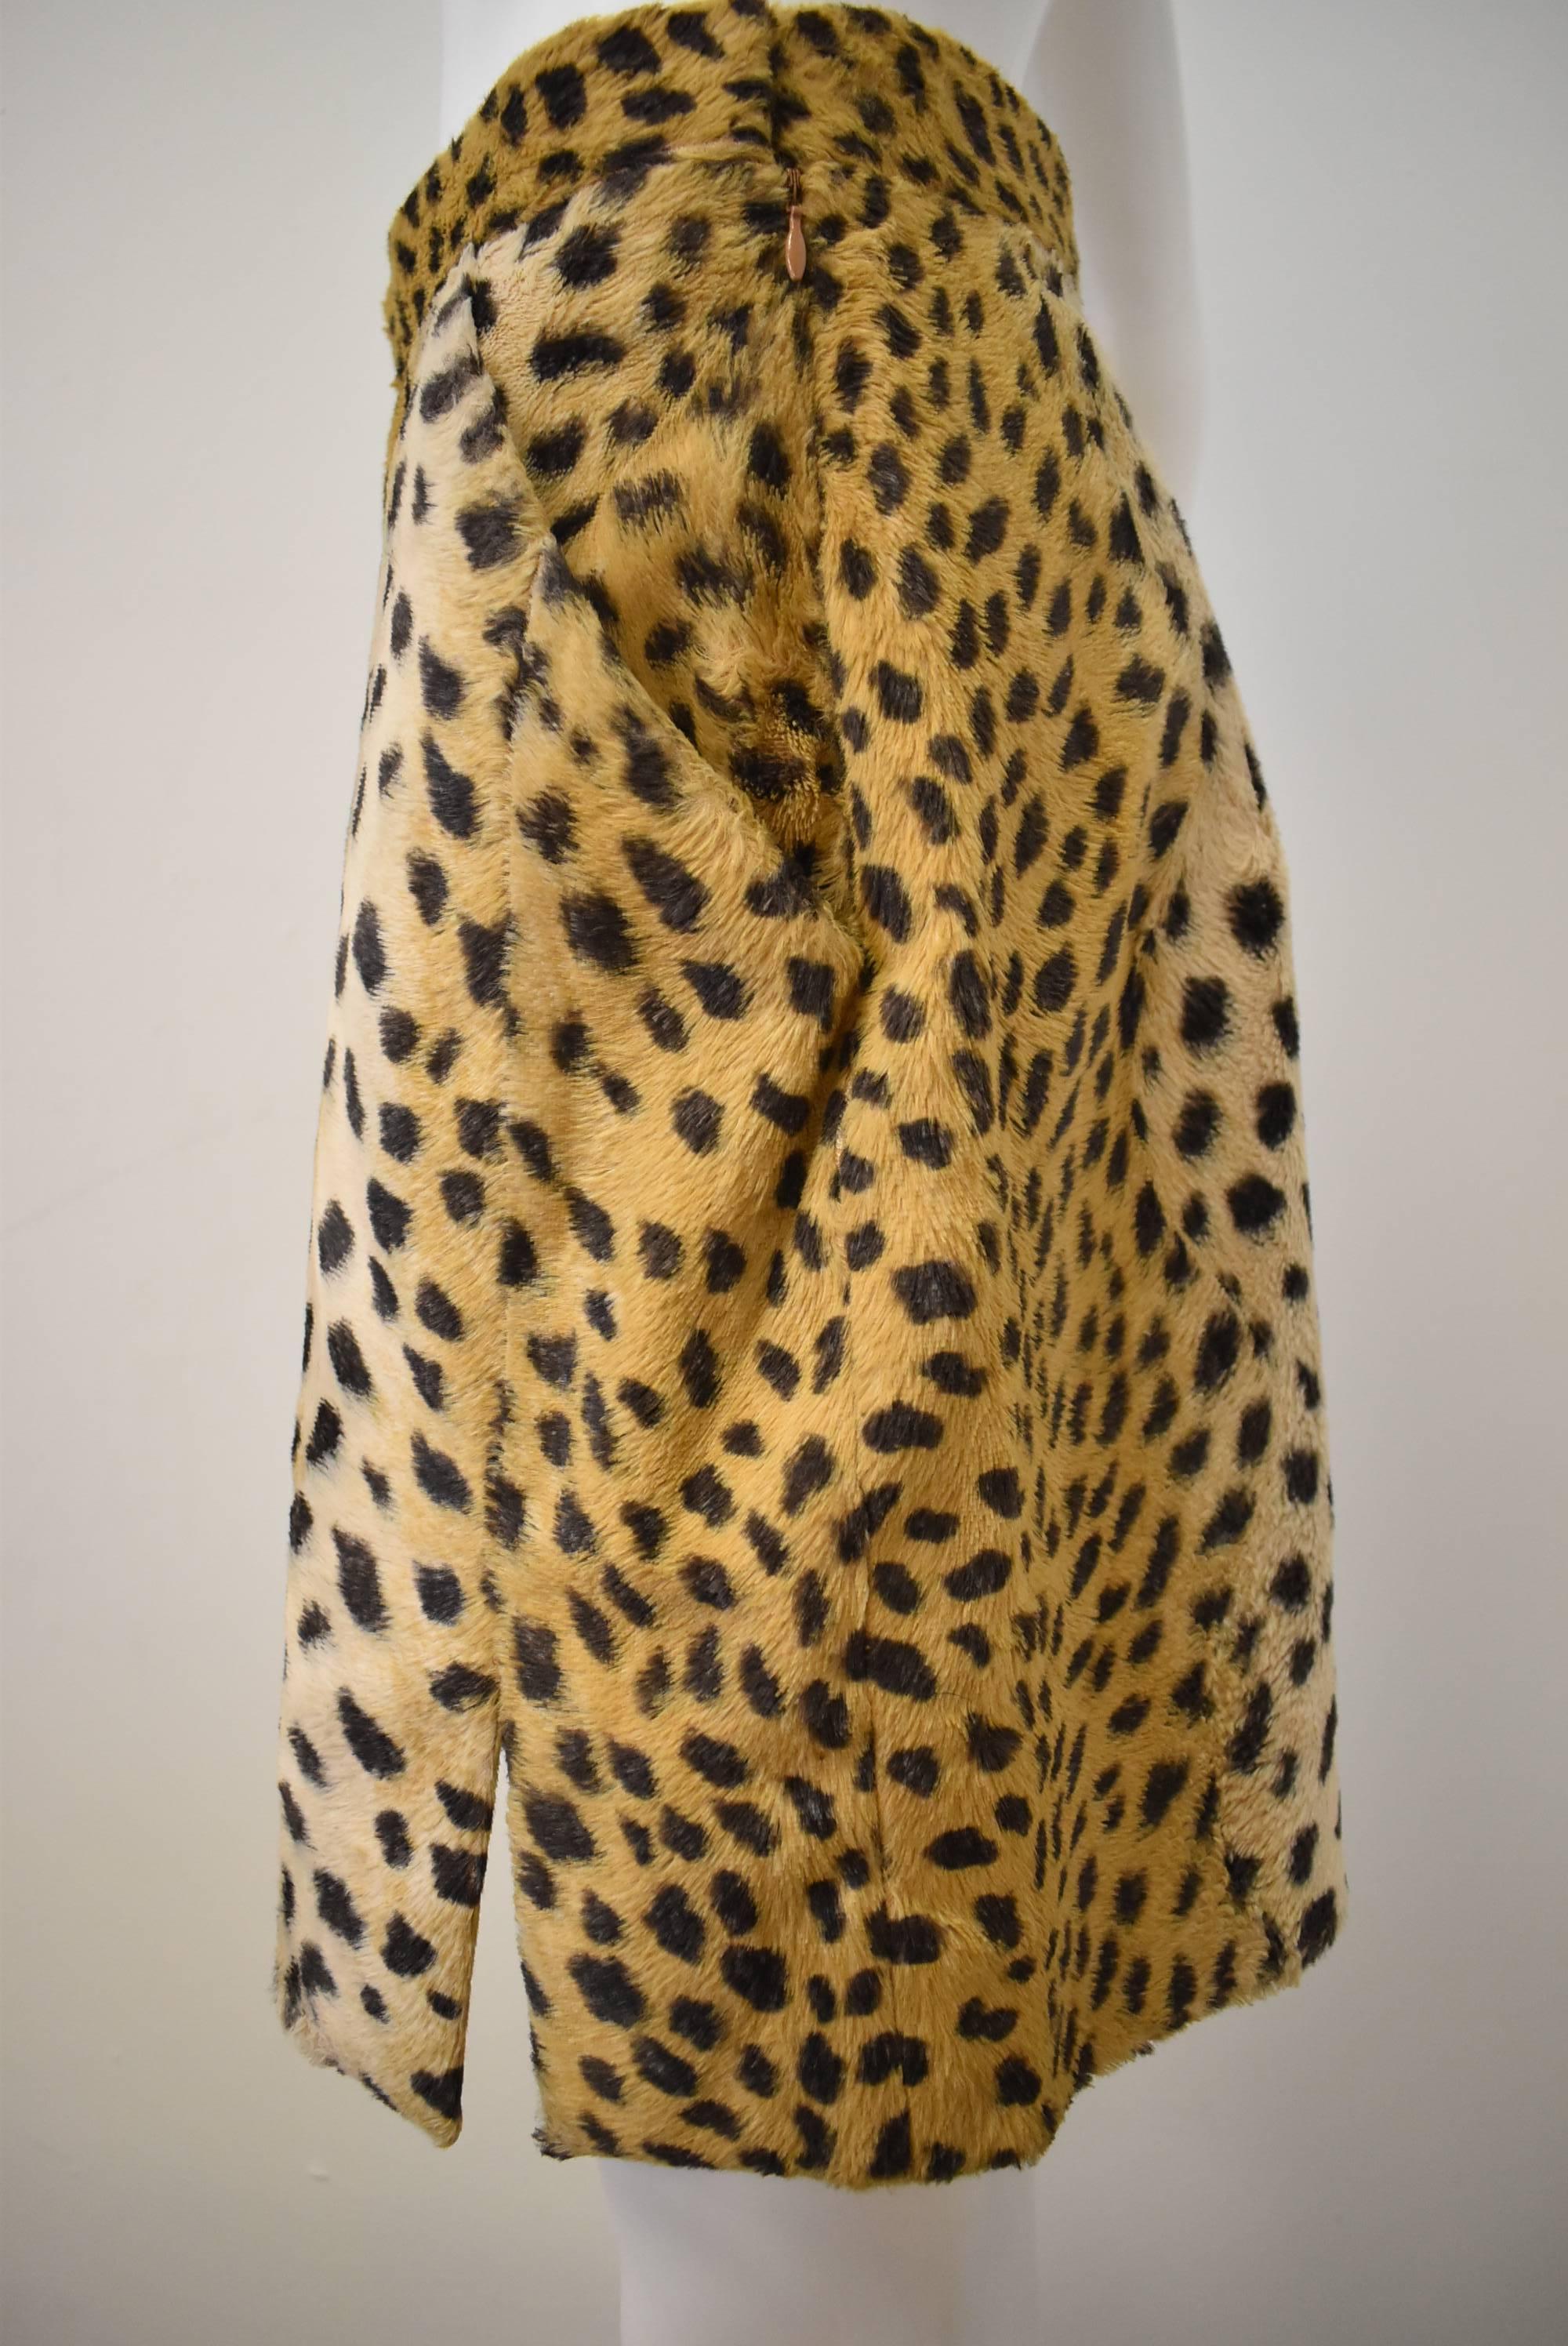  A mini skirt from the late 1990s by Givenchy. This skirt was designed under the creative direction of the late Alexander Mcqueen. The mini skirt is made from a soft short pile faux abstract leopard print featuring two front pockets and 4.5 inch